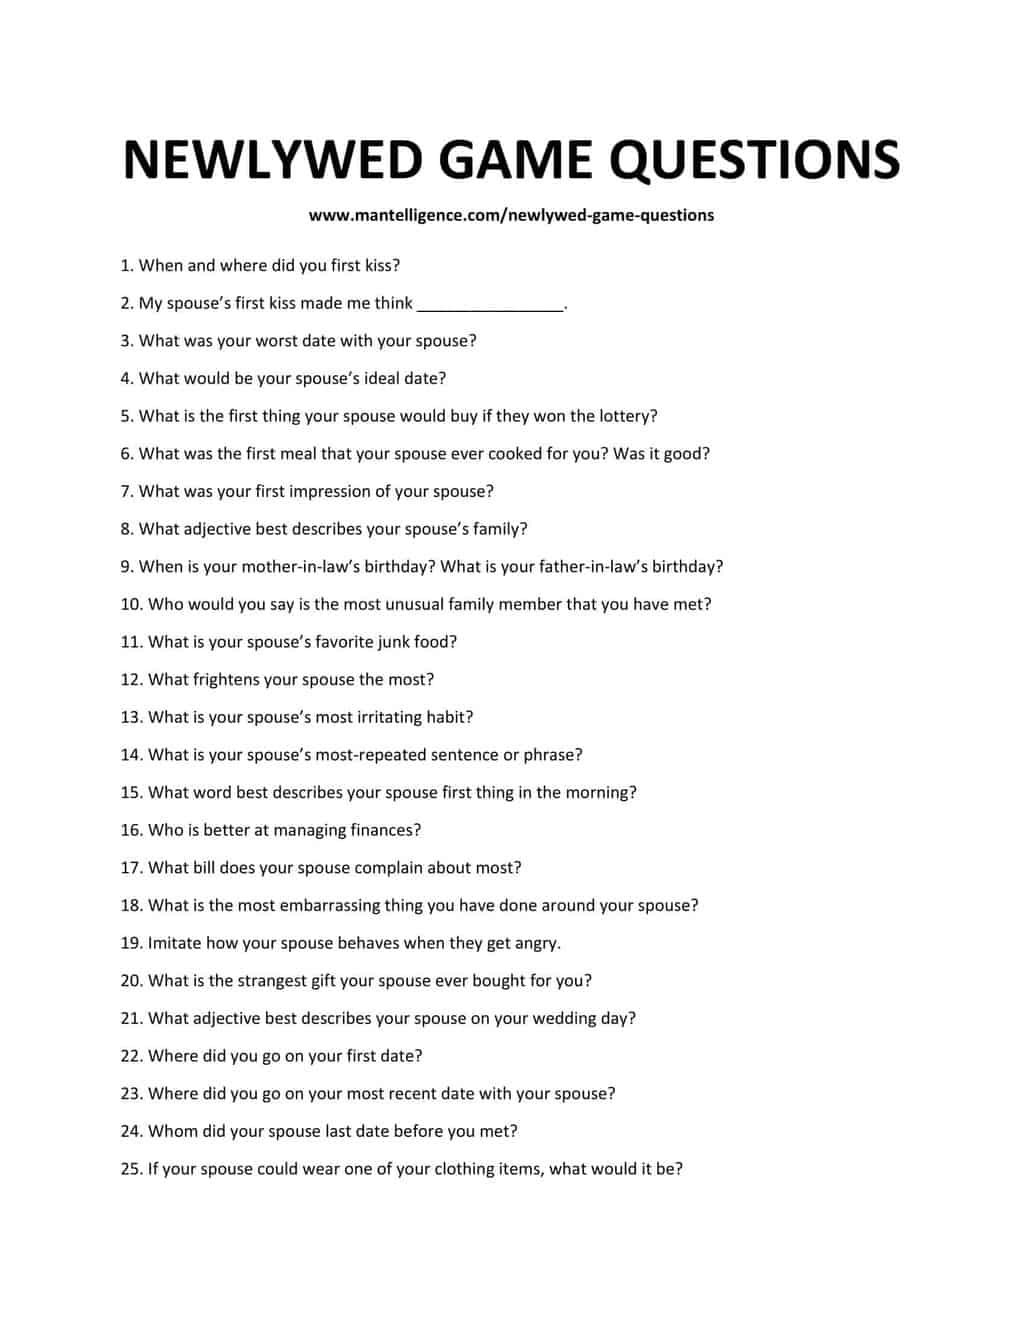 106 Fun Newlywed Game Questions - Best Way To Know Your Spouse